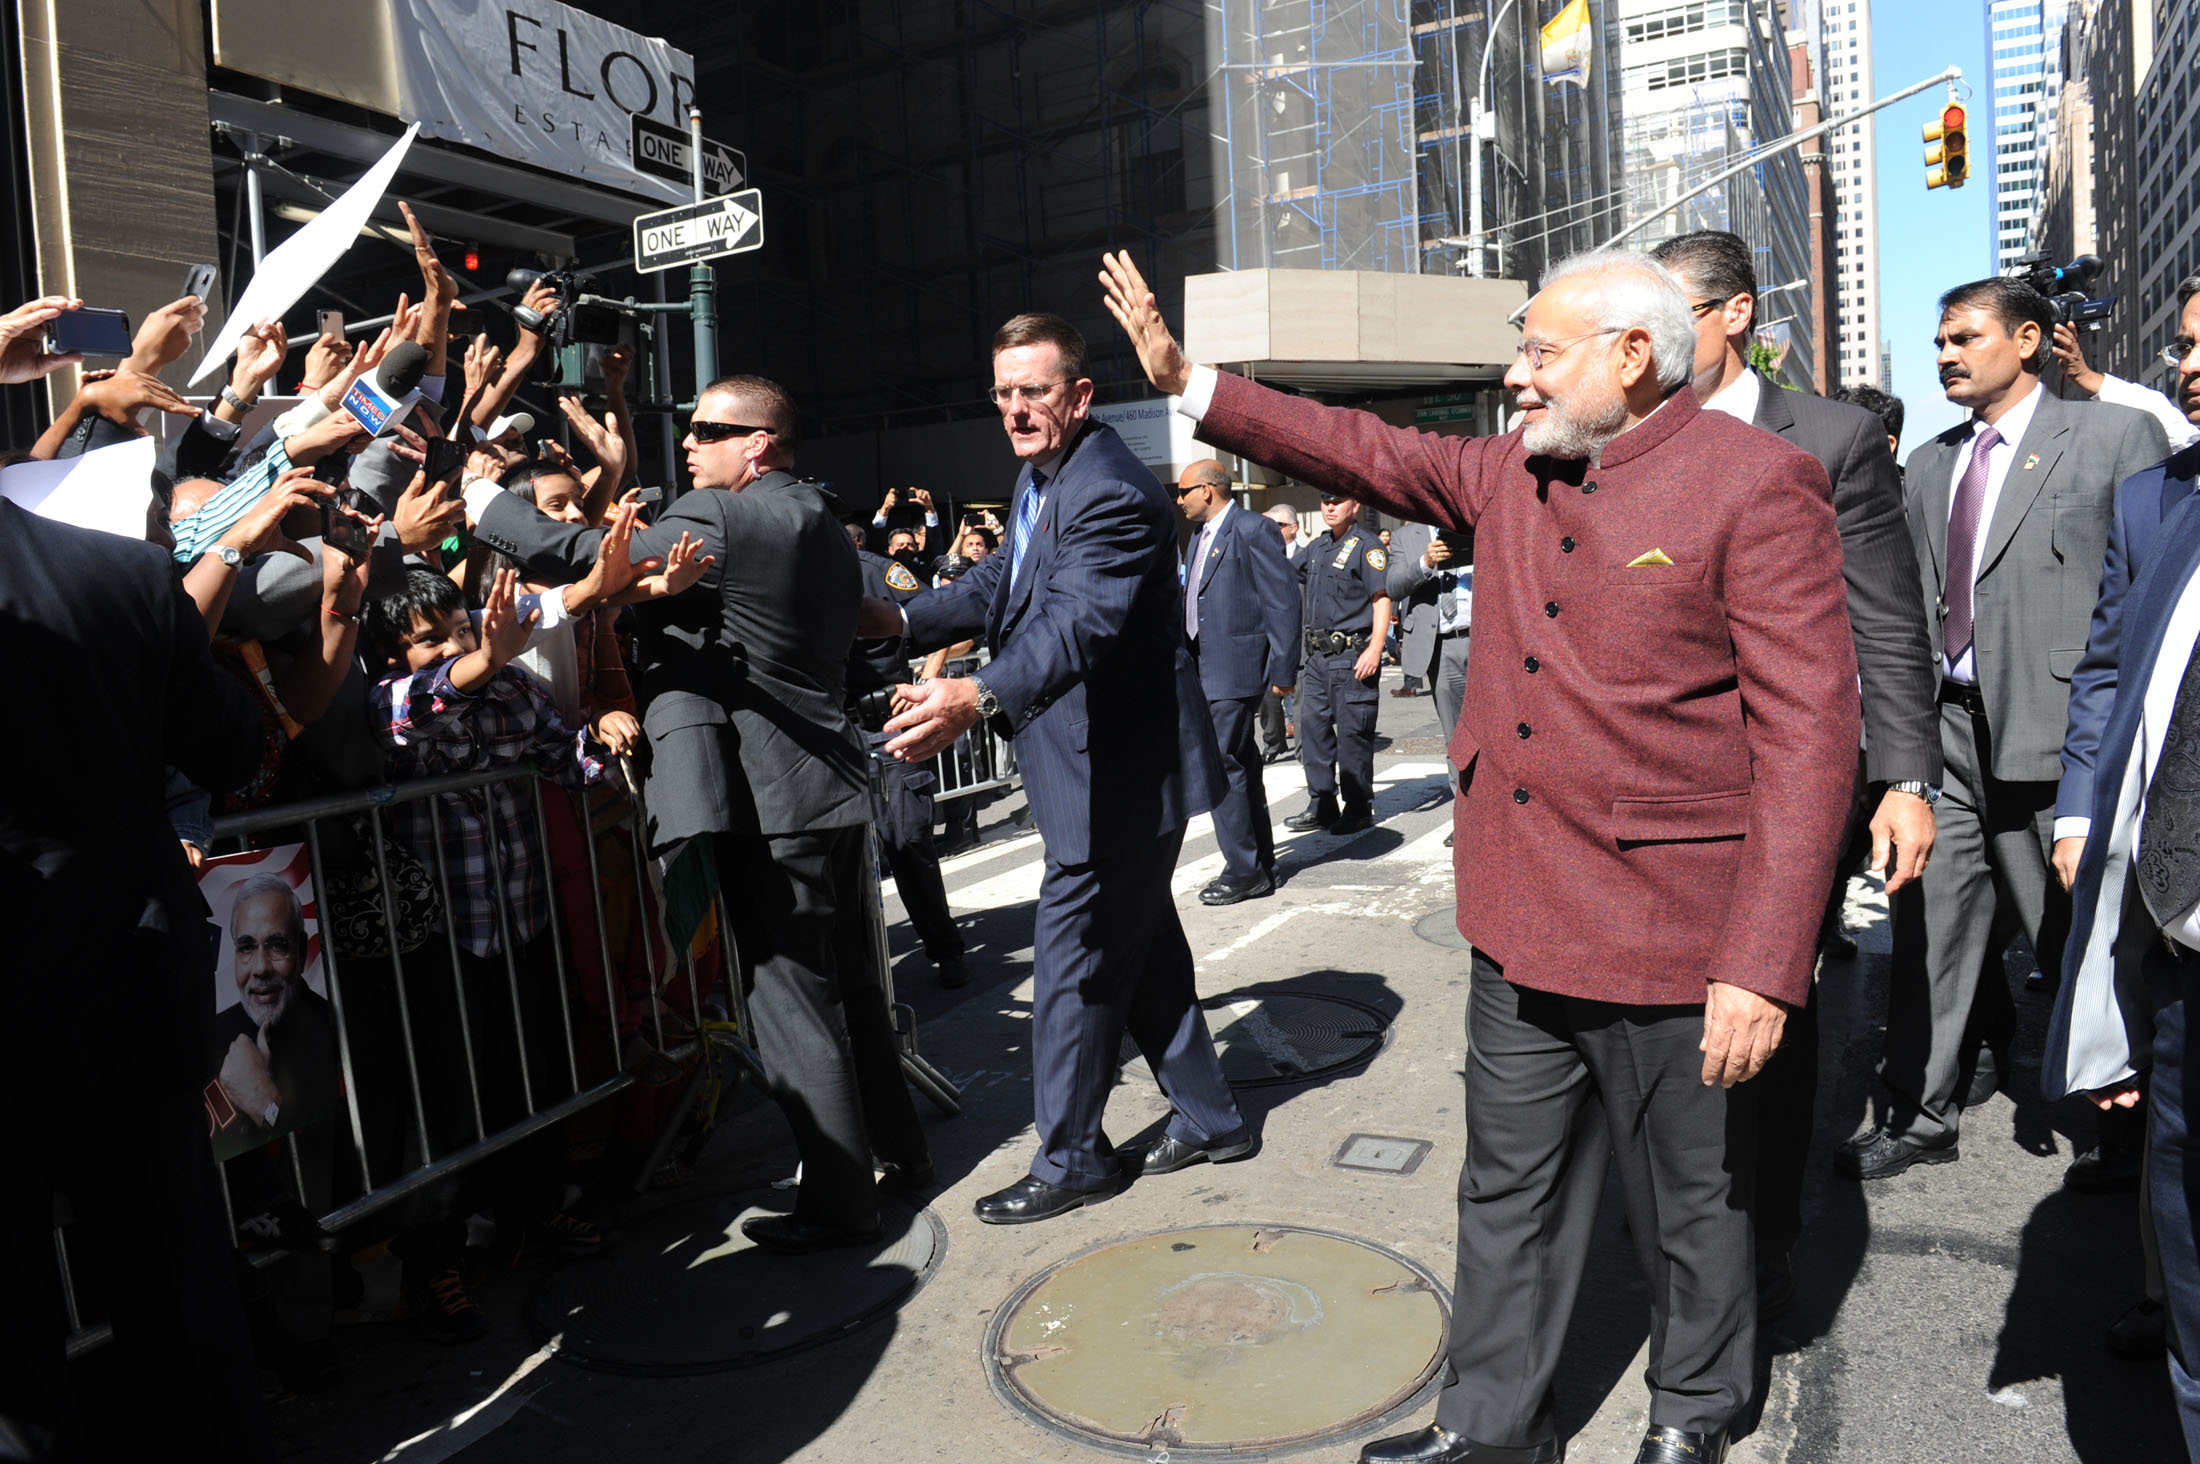 Prime Minister Narendra Modi being greeted by the people in New York